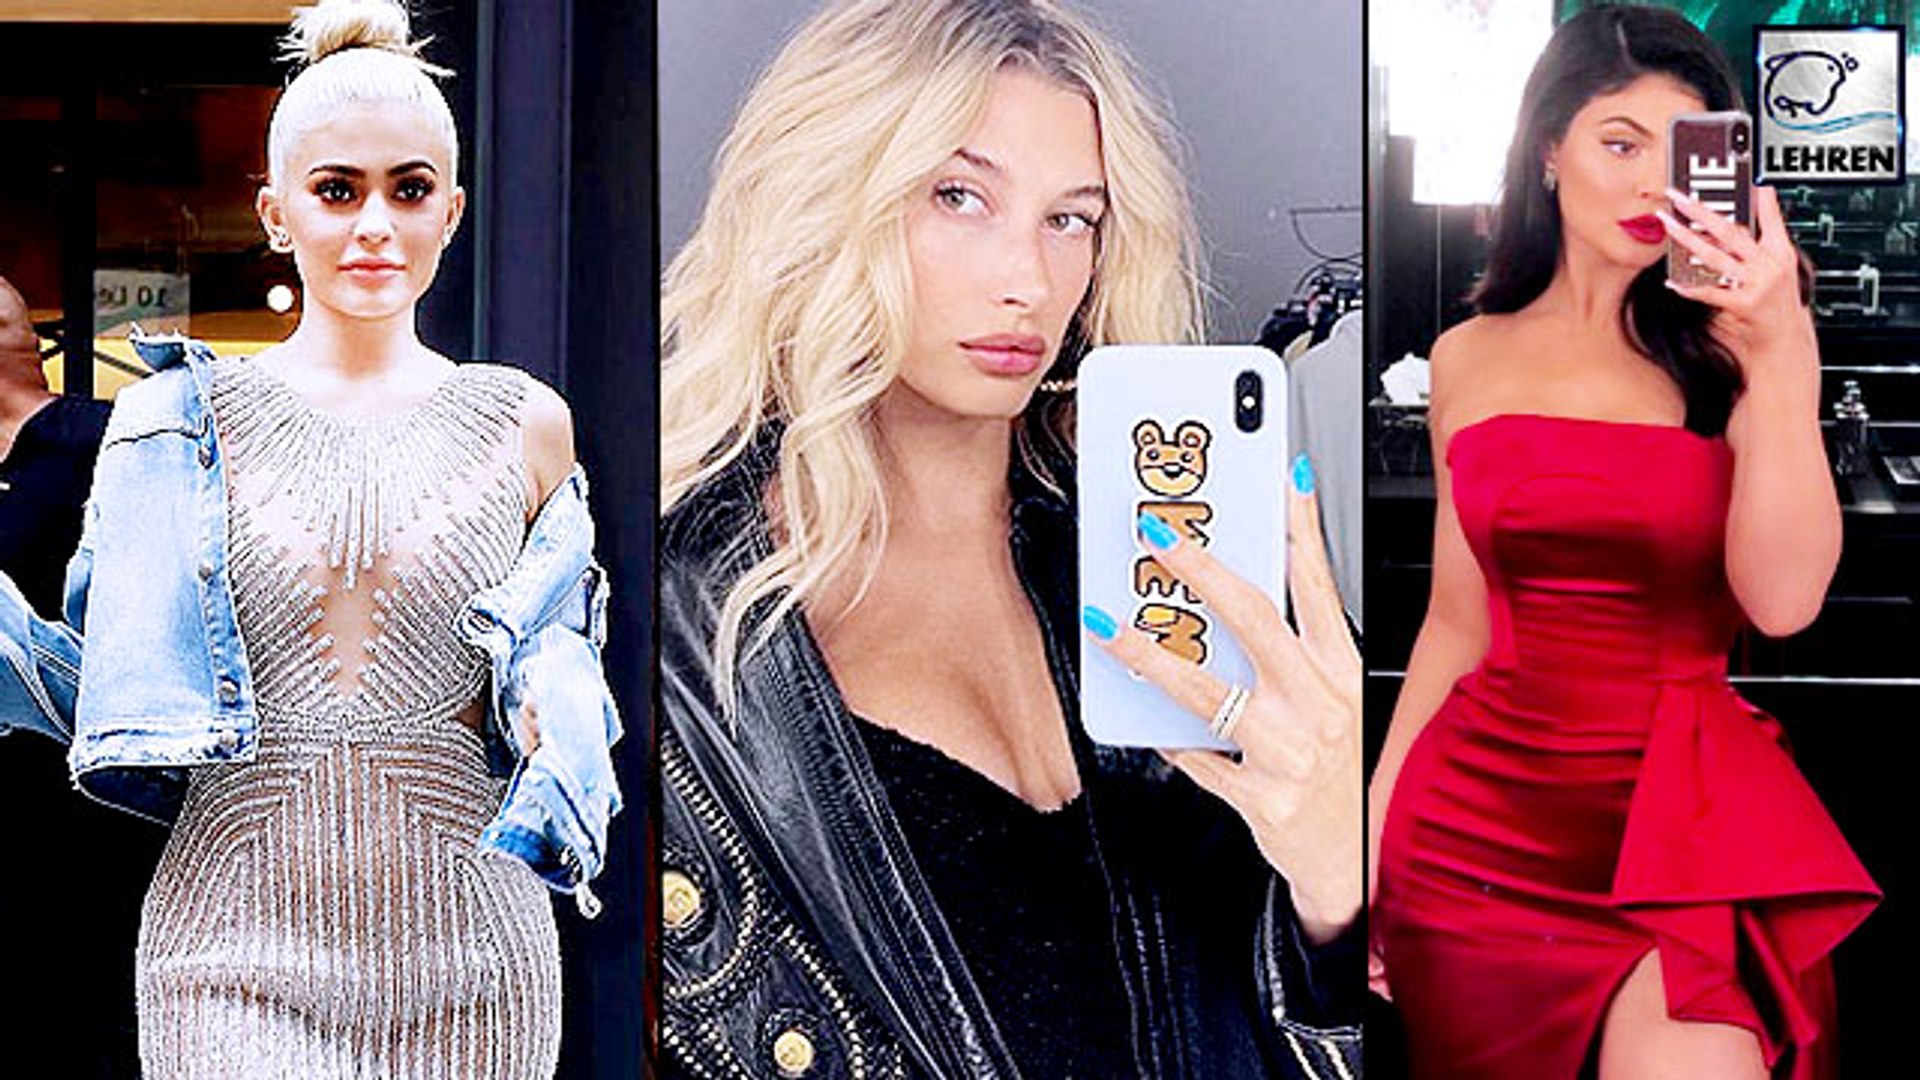 Kylie Jenner Called 'Disrespectful' For Dressing 'Extra' At Justin-Hailey's